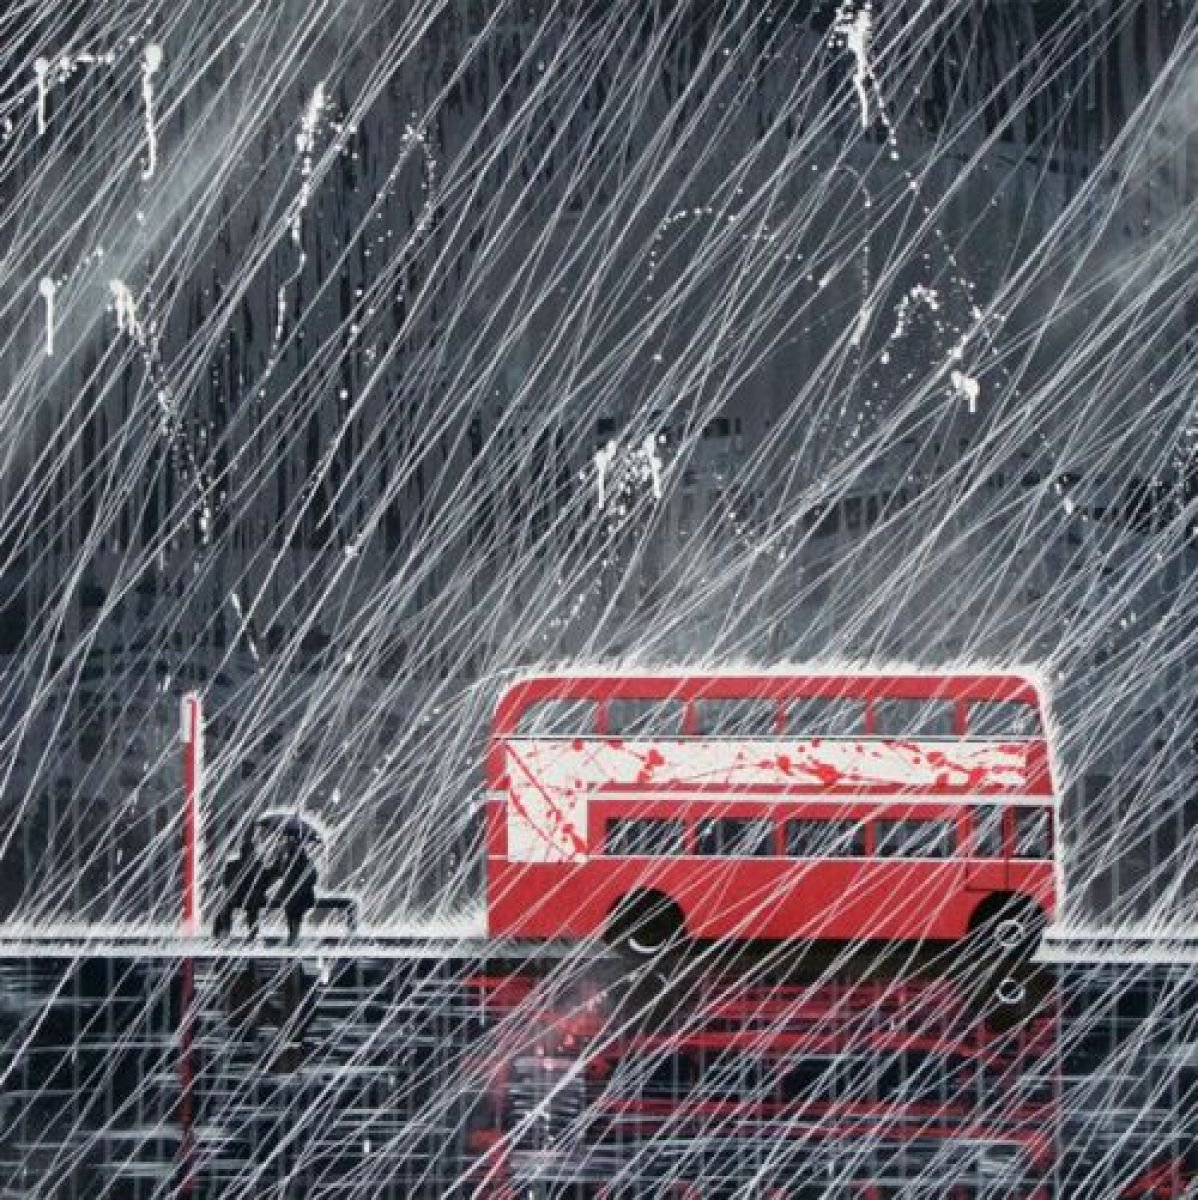 Bus Stop by Richard Yeomans